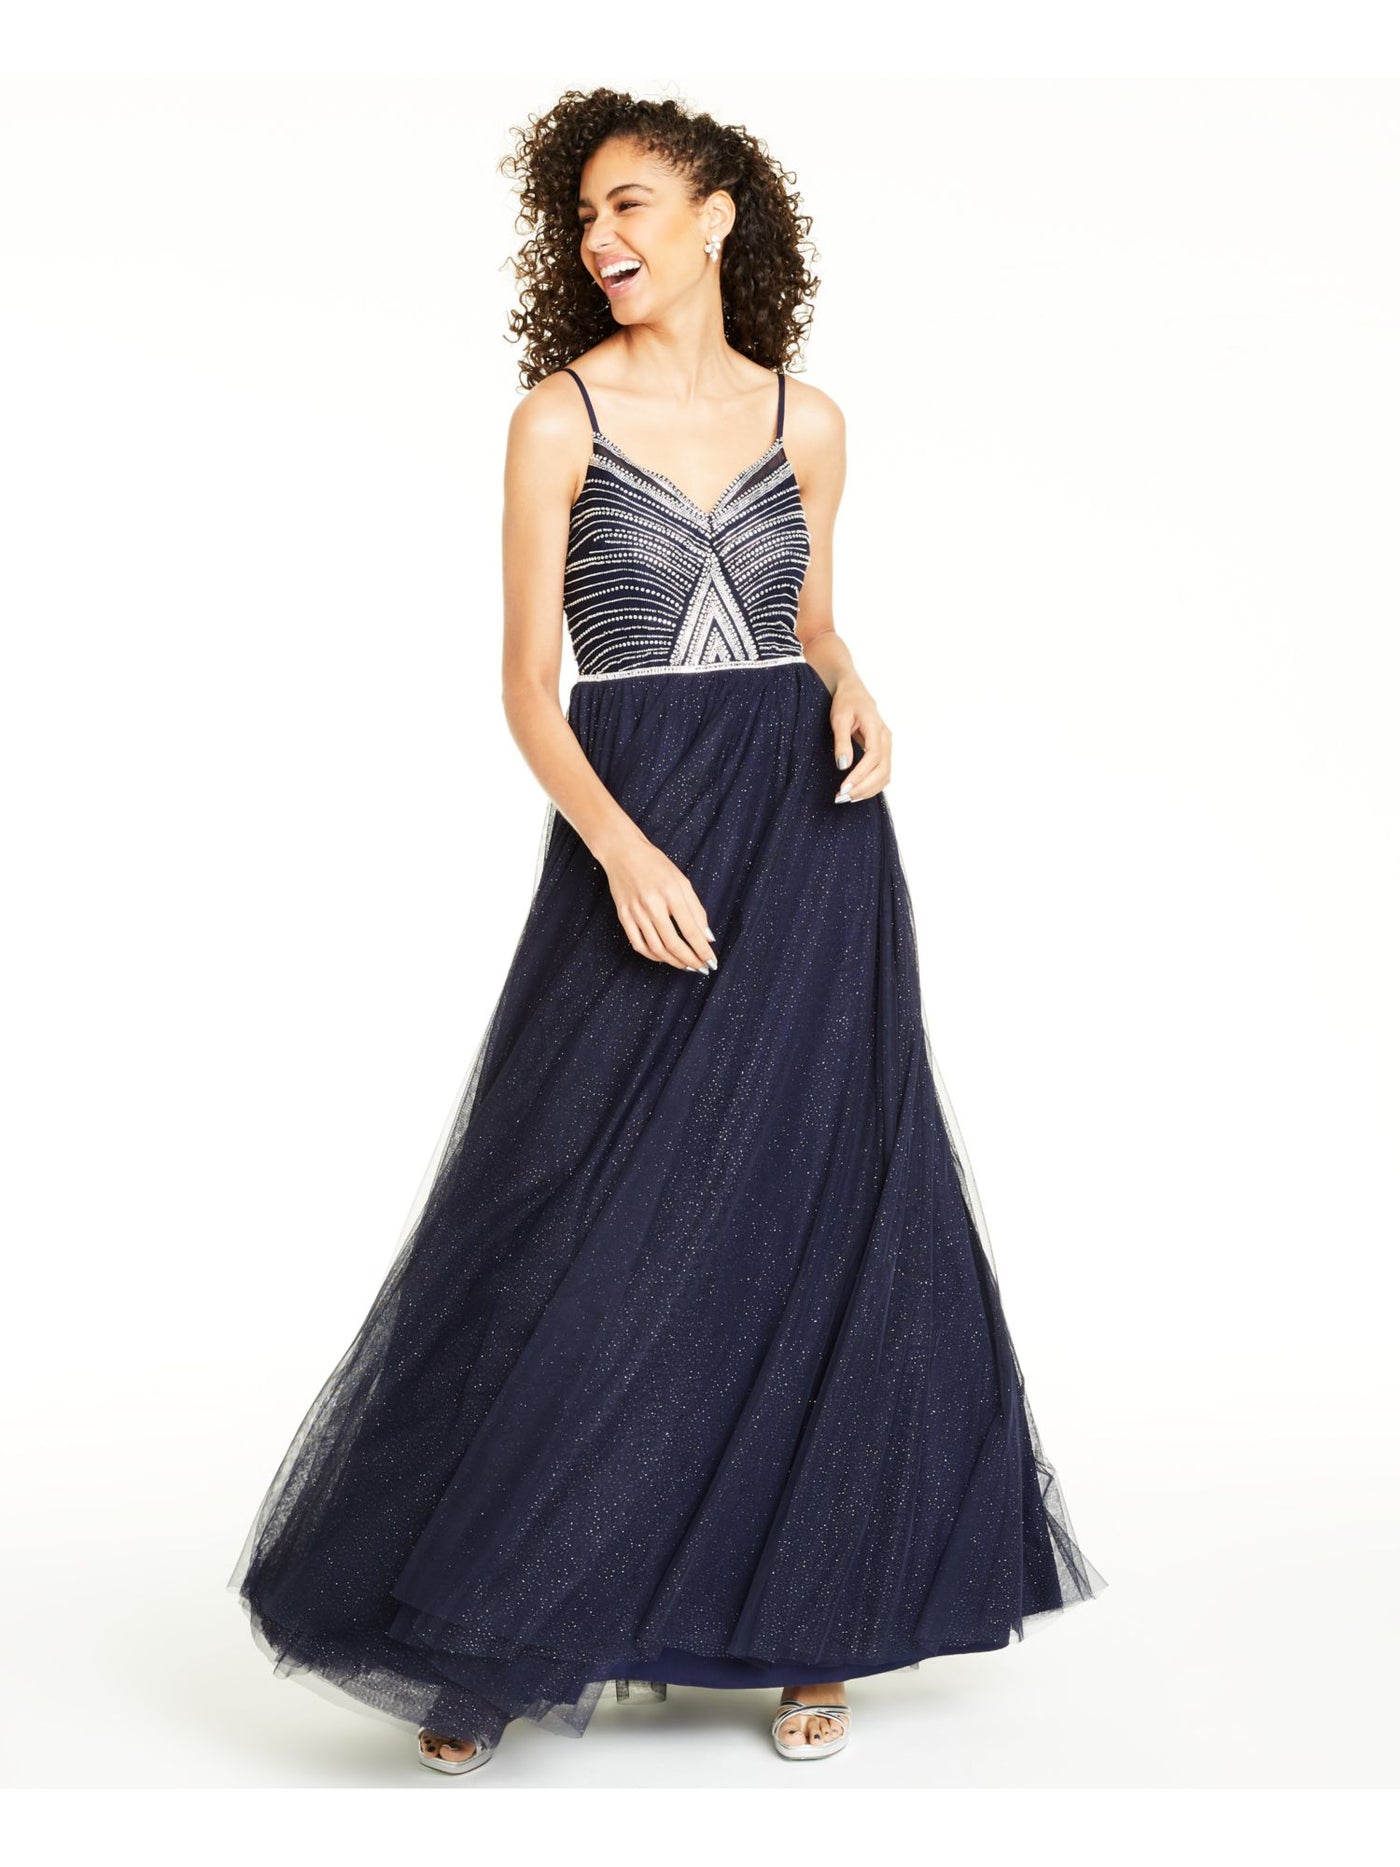 SAY YES TO THE PROM Womens Glitter Sheer Spaghetti Strap Sweetheart Neckline Full-Length Formal Fit + Flare Dress